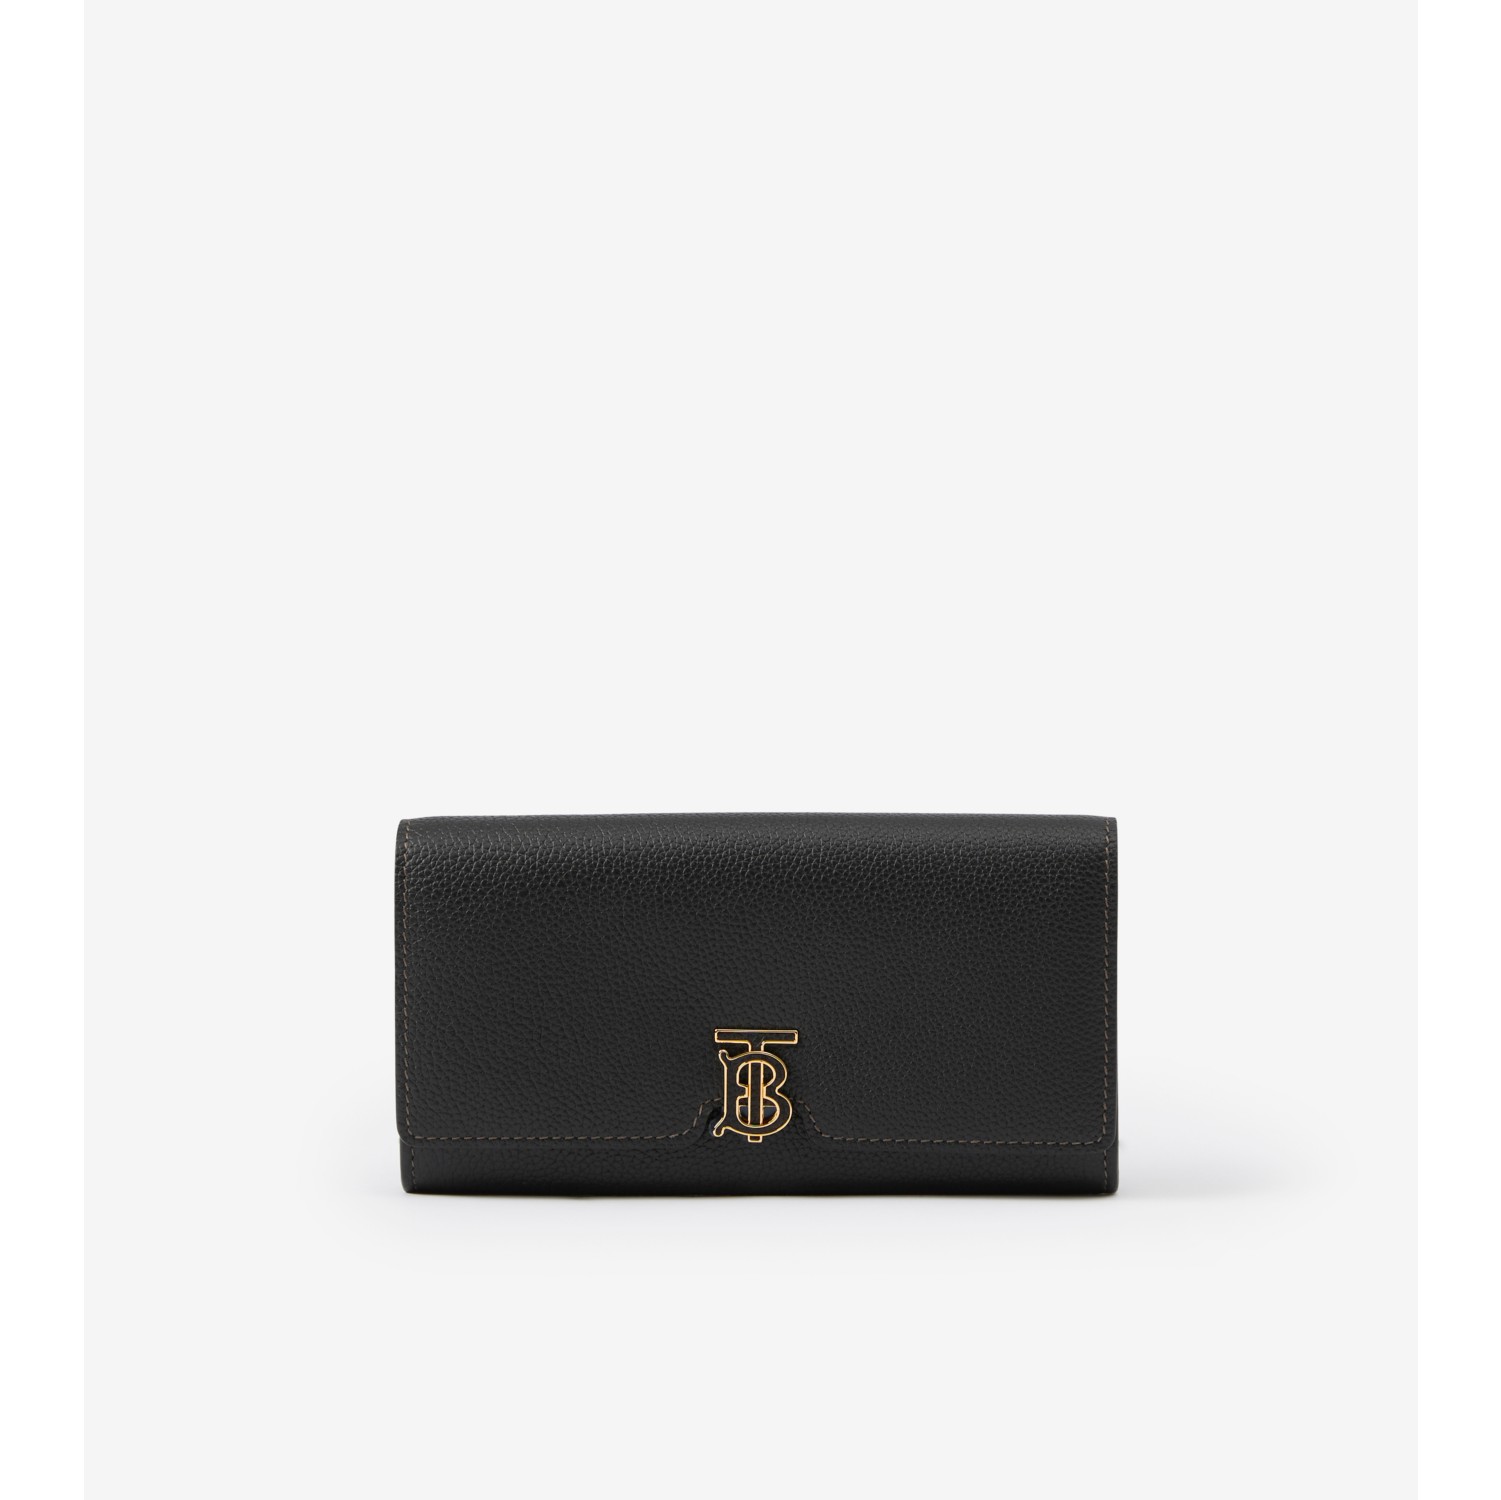 Grainy Leather TB Continental Wallet in Black - Women